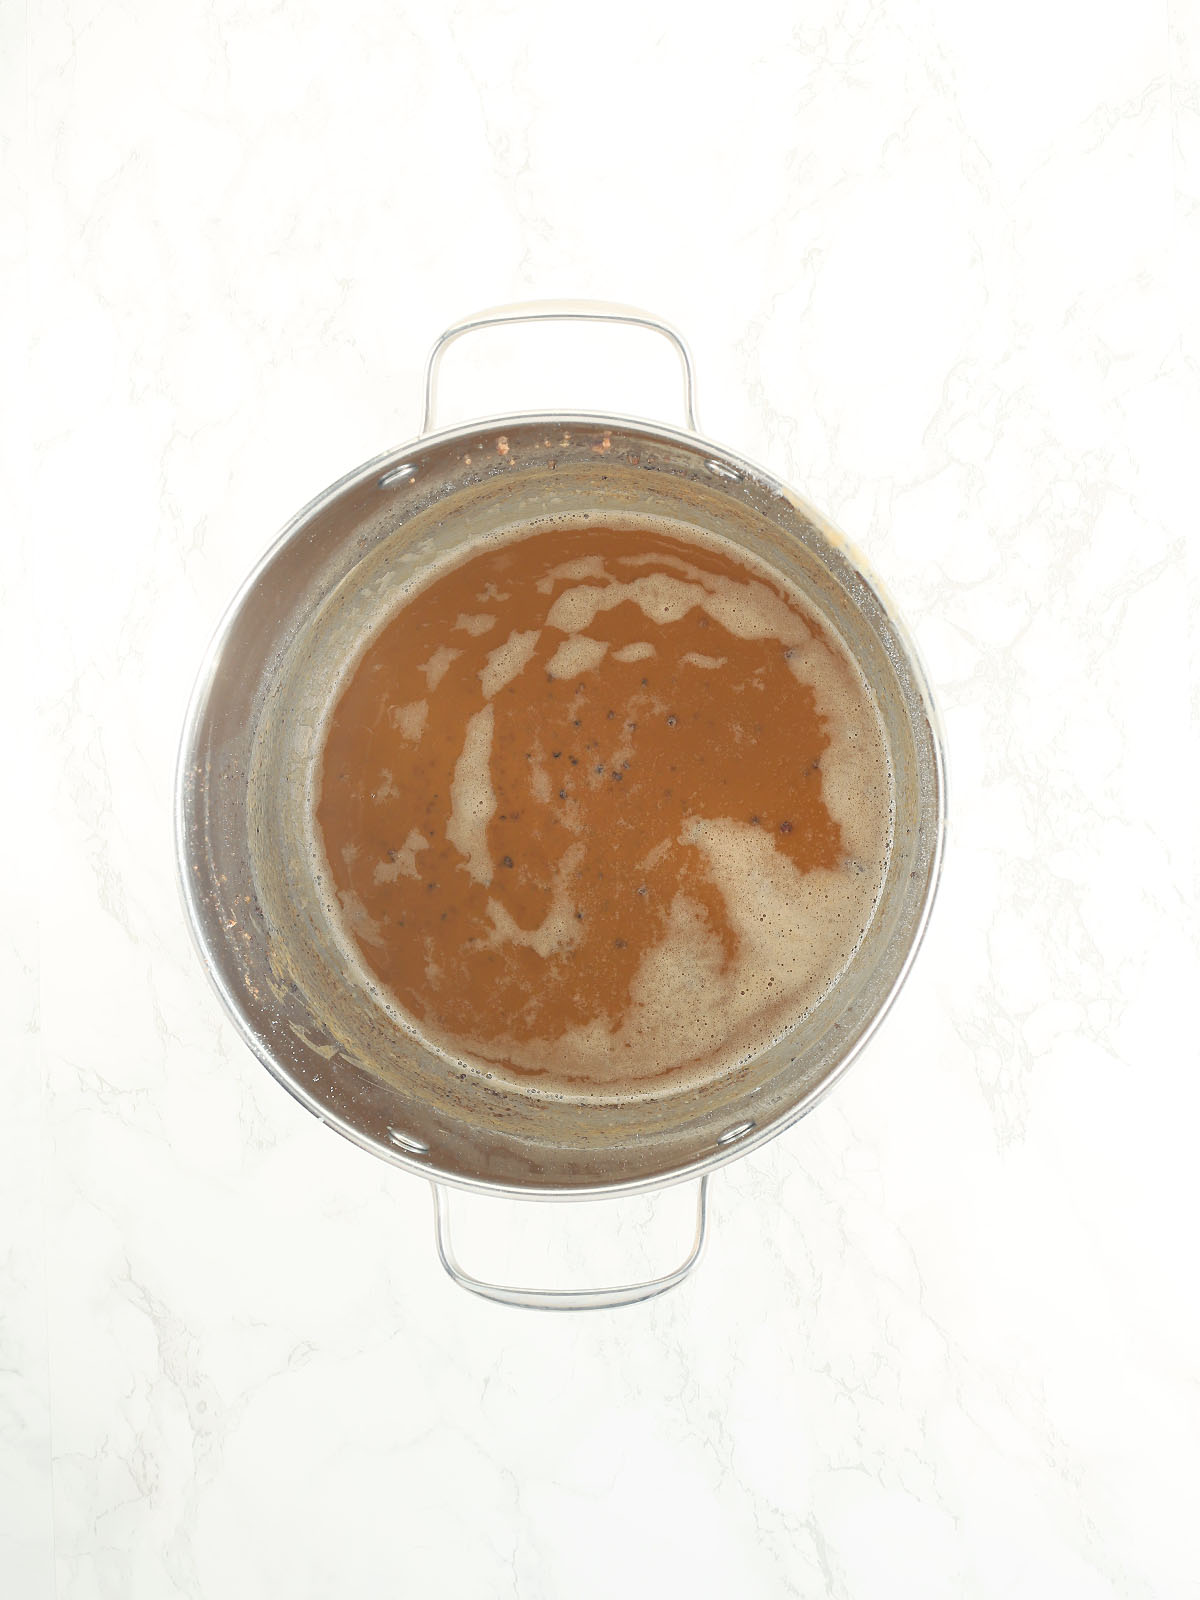 peanut butter colored roux in a large stainless steel stock pot